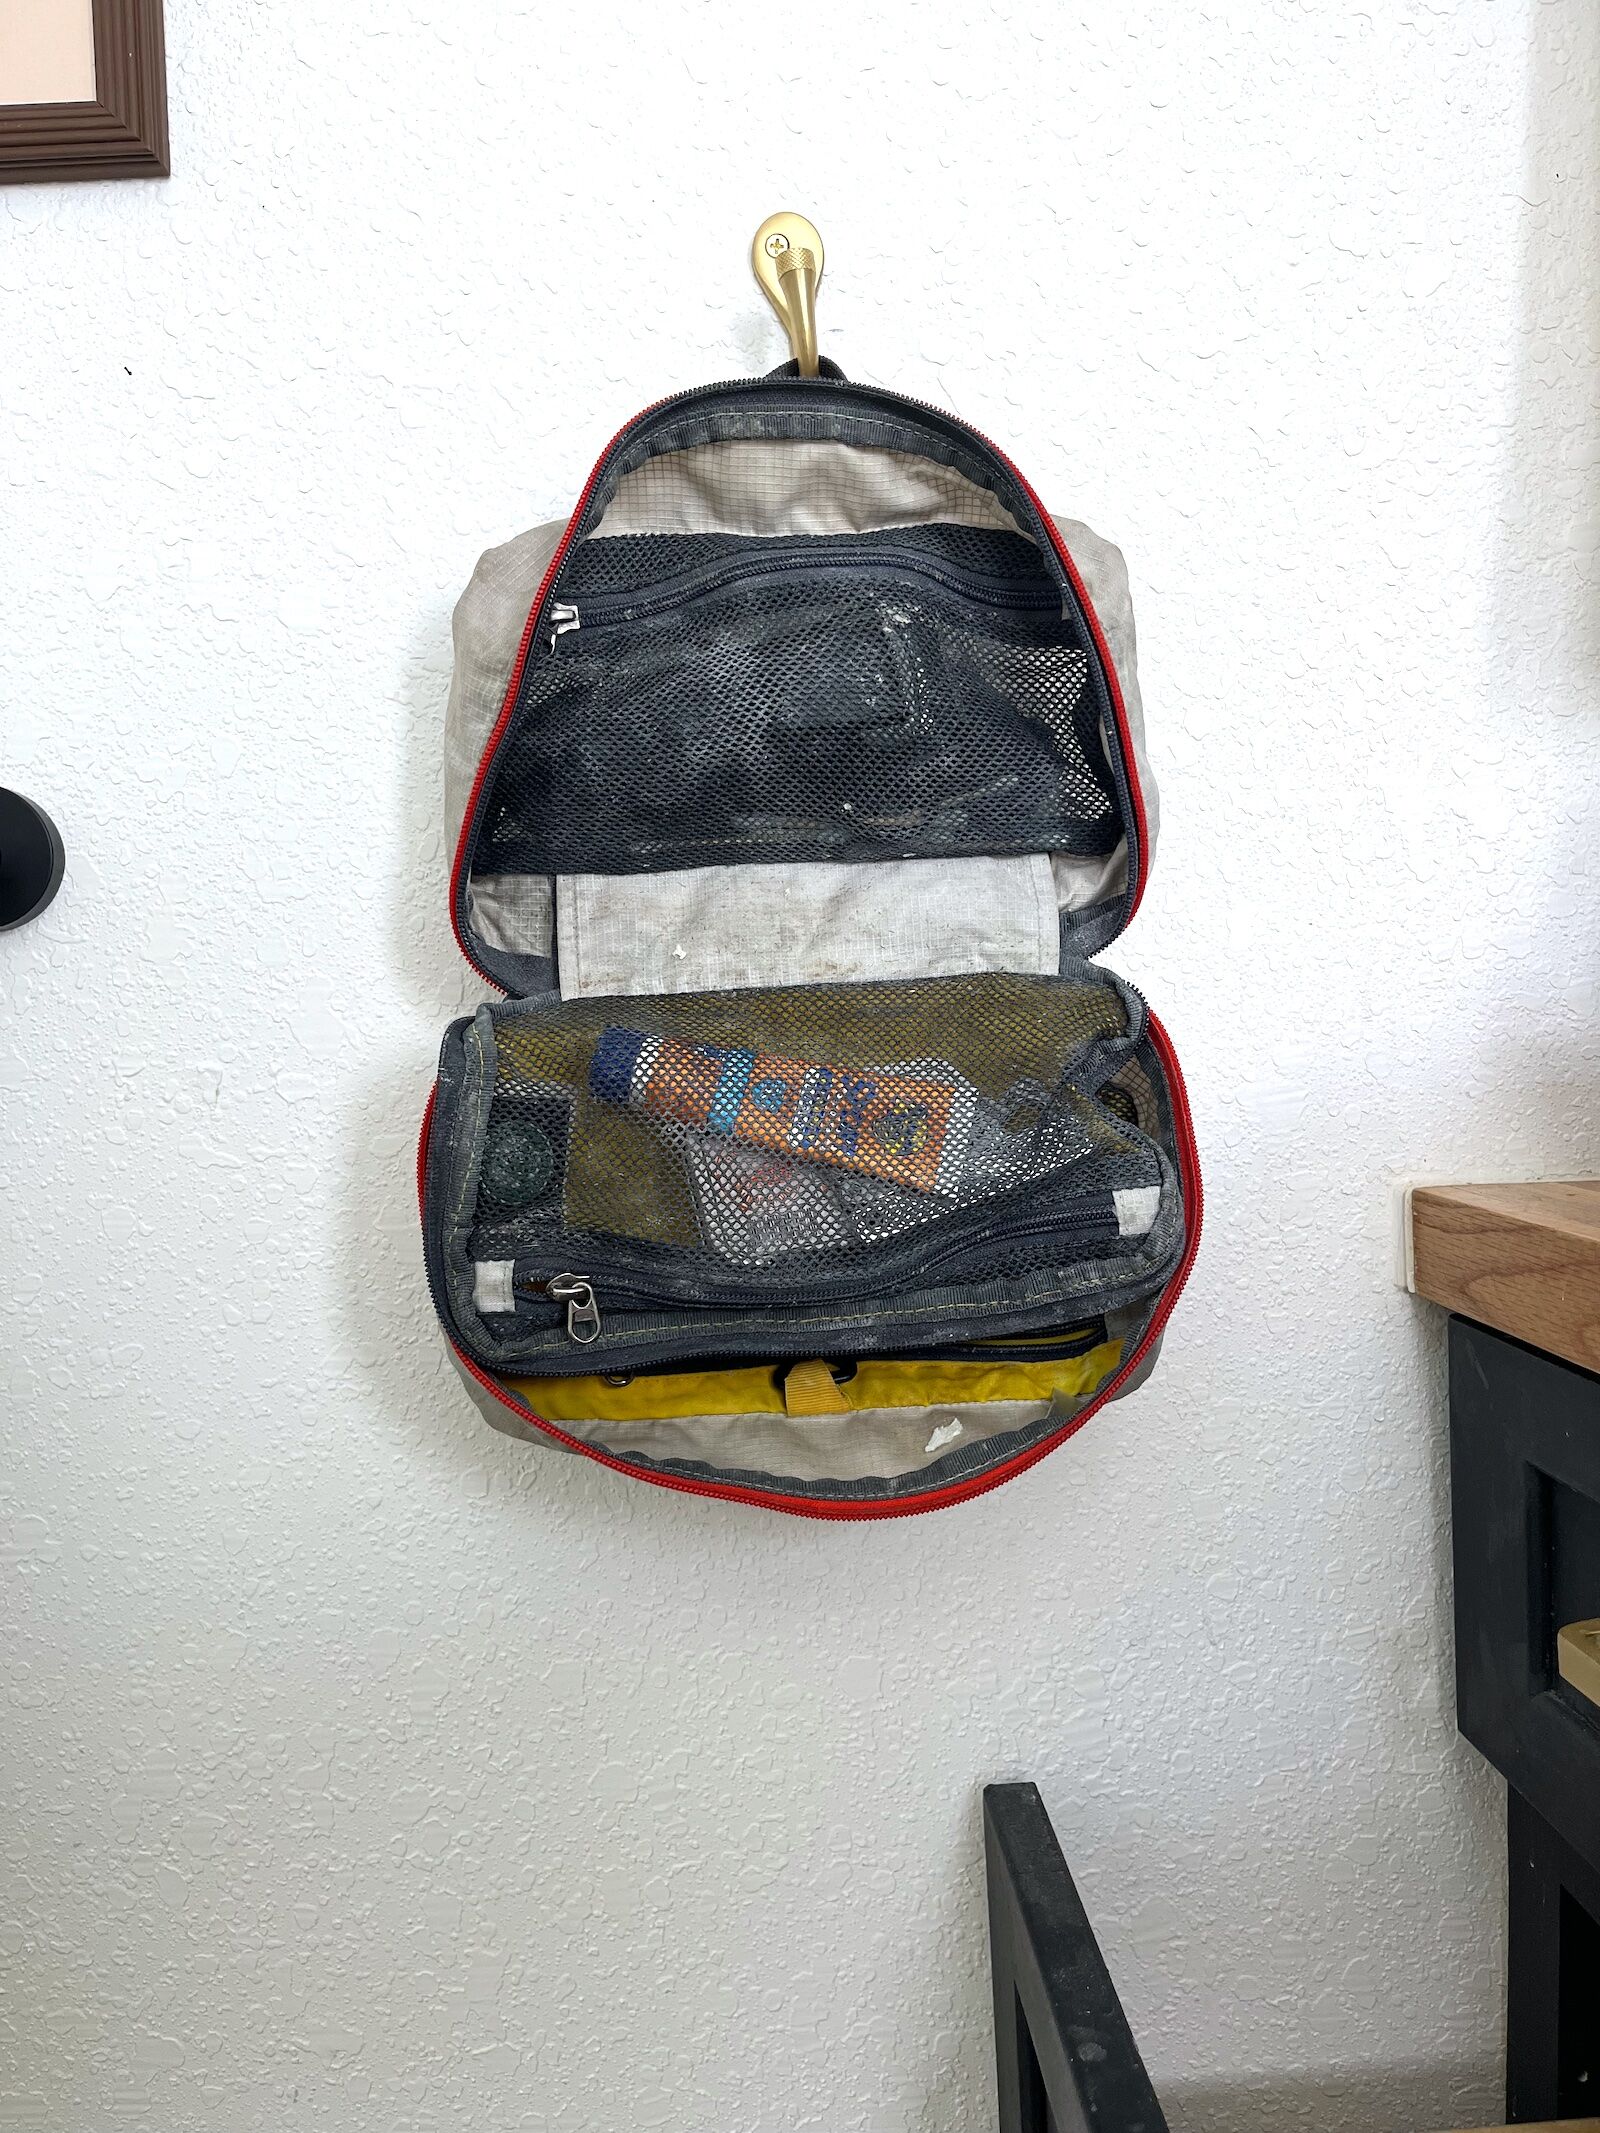 This Mountainsmith Toiletry Bag Survived Six Years of Global Travel